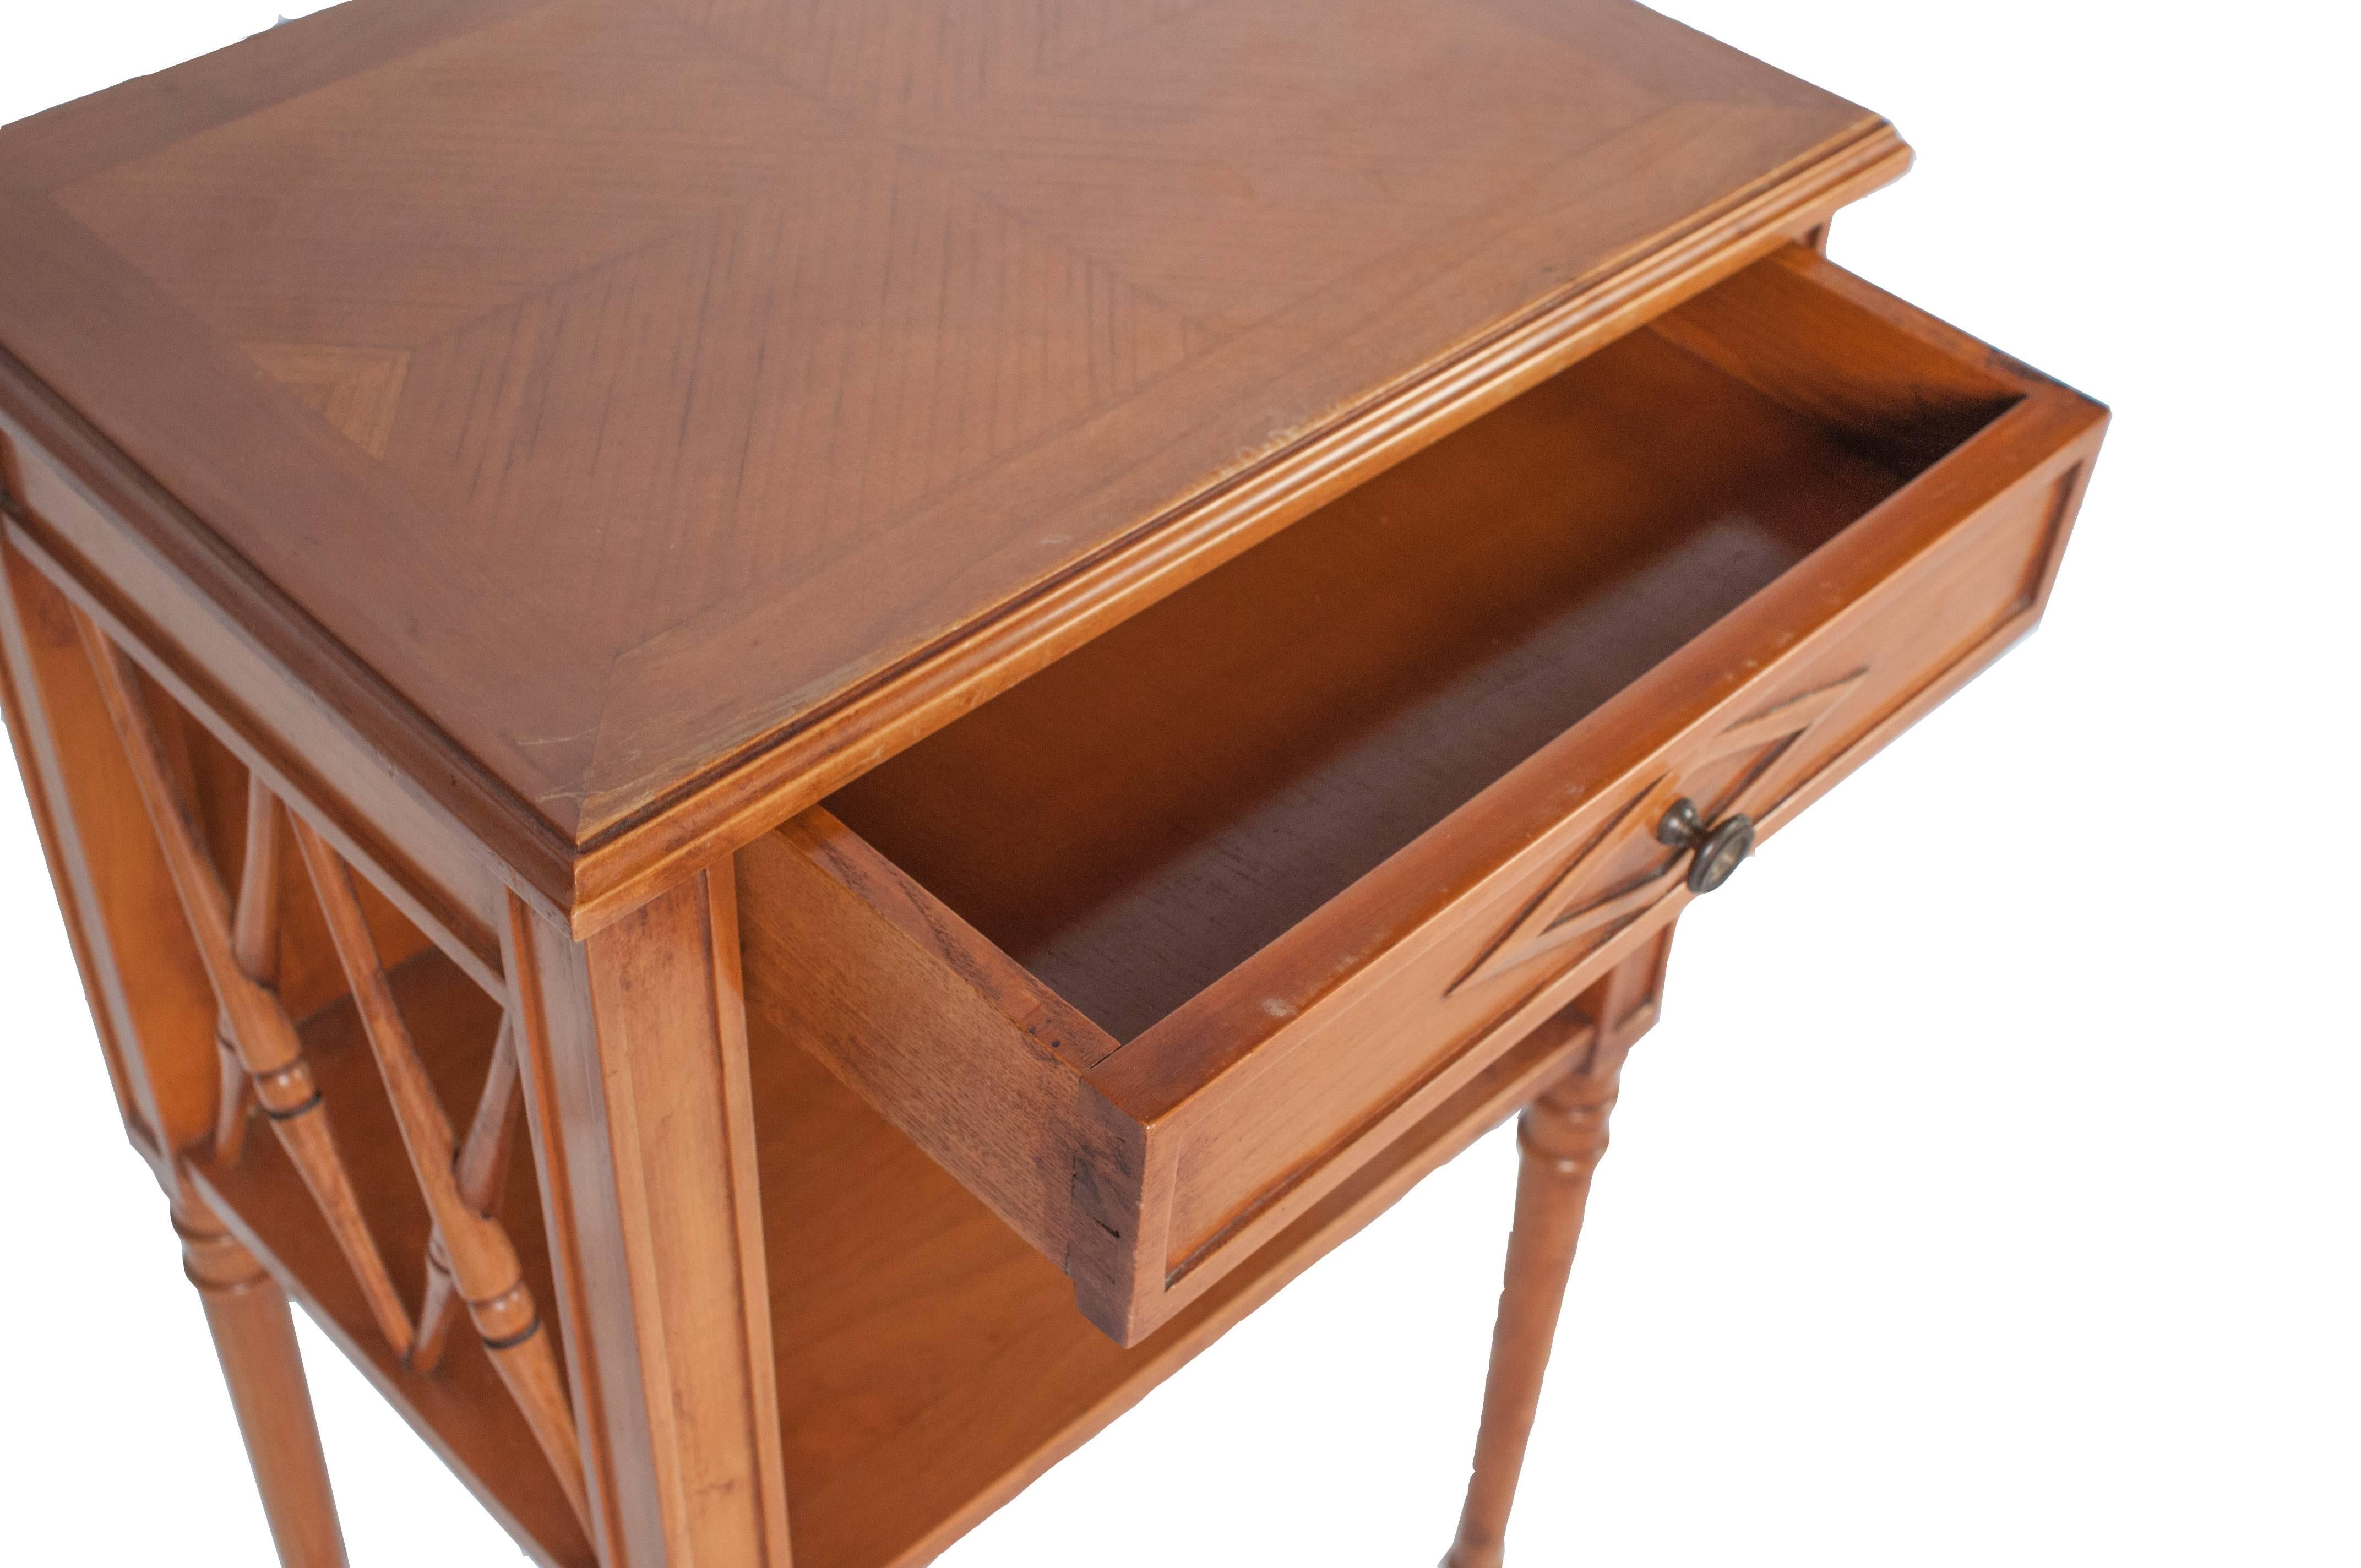 French Pair of Meister 'Cherrywood' Nightstands or Side Tables with Drawers